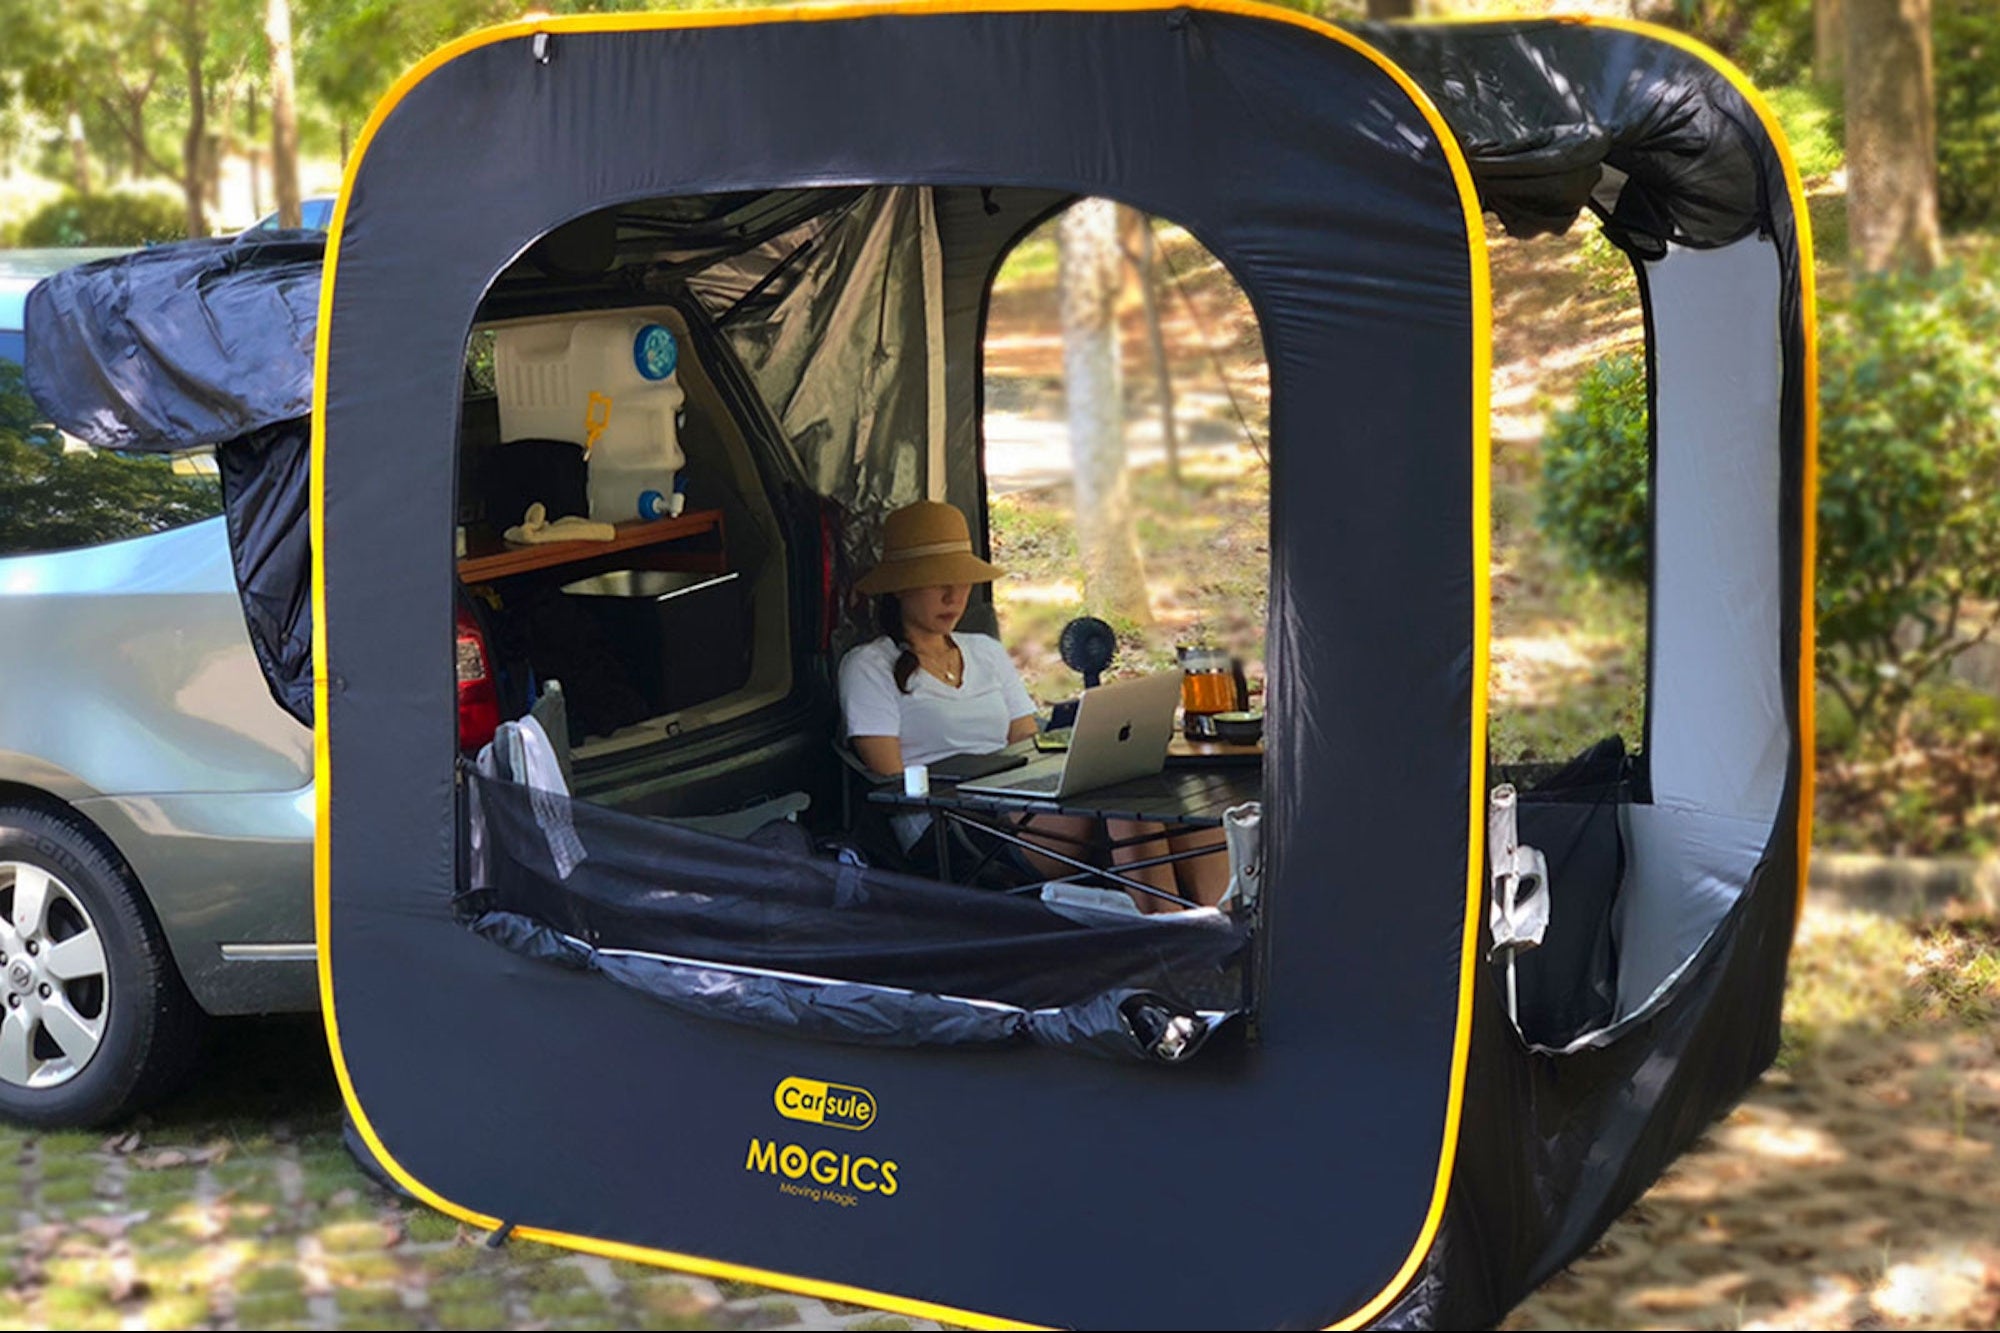 This Pop-Up Cabin Will Make Your Road Trips Fun and It's 15% Off